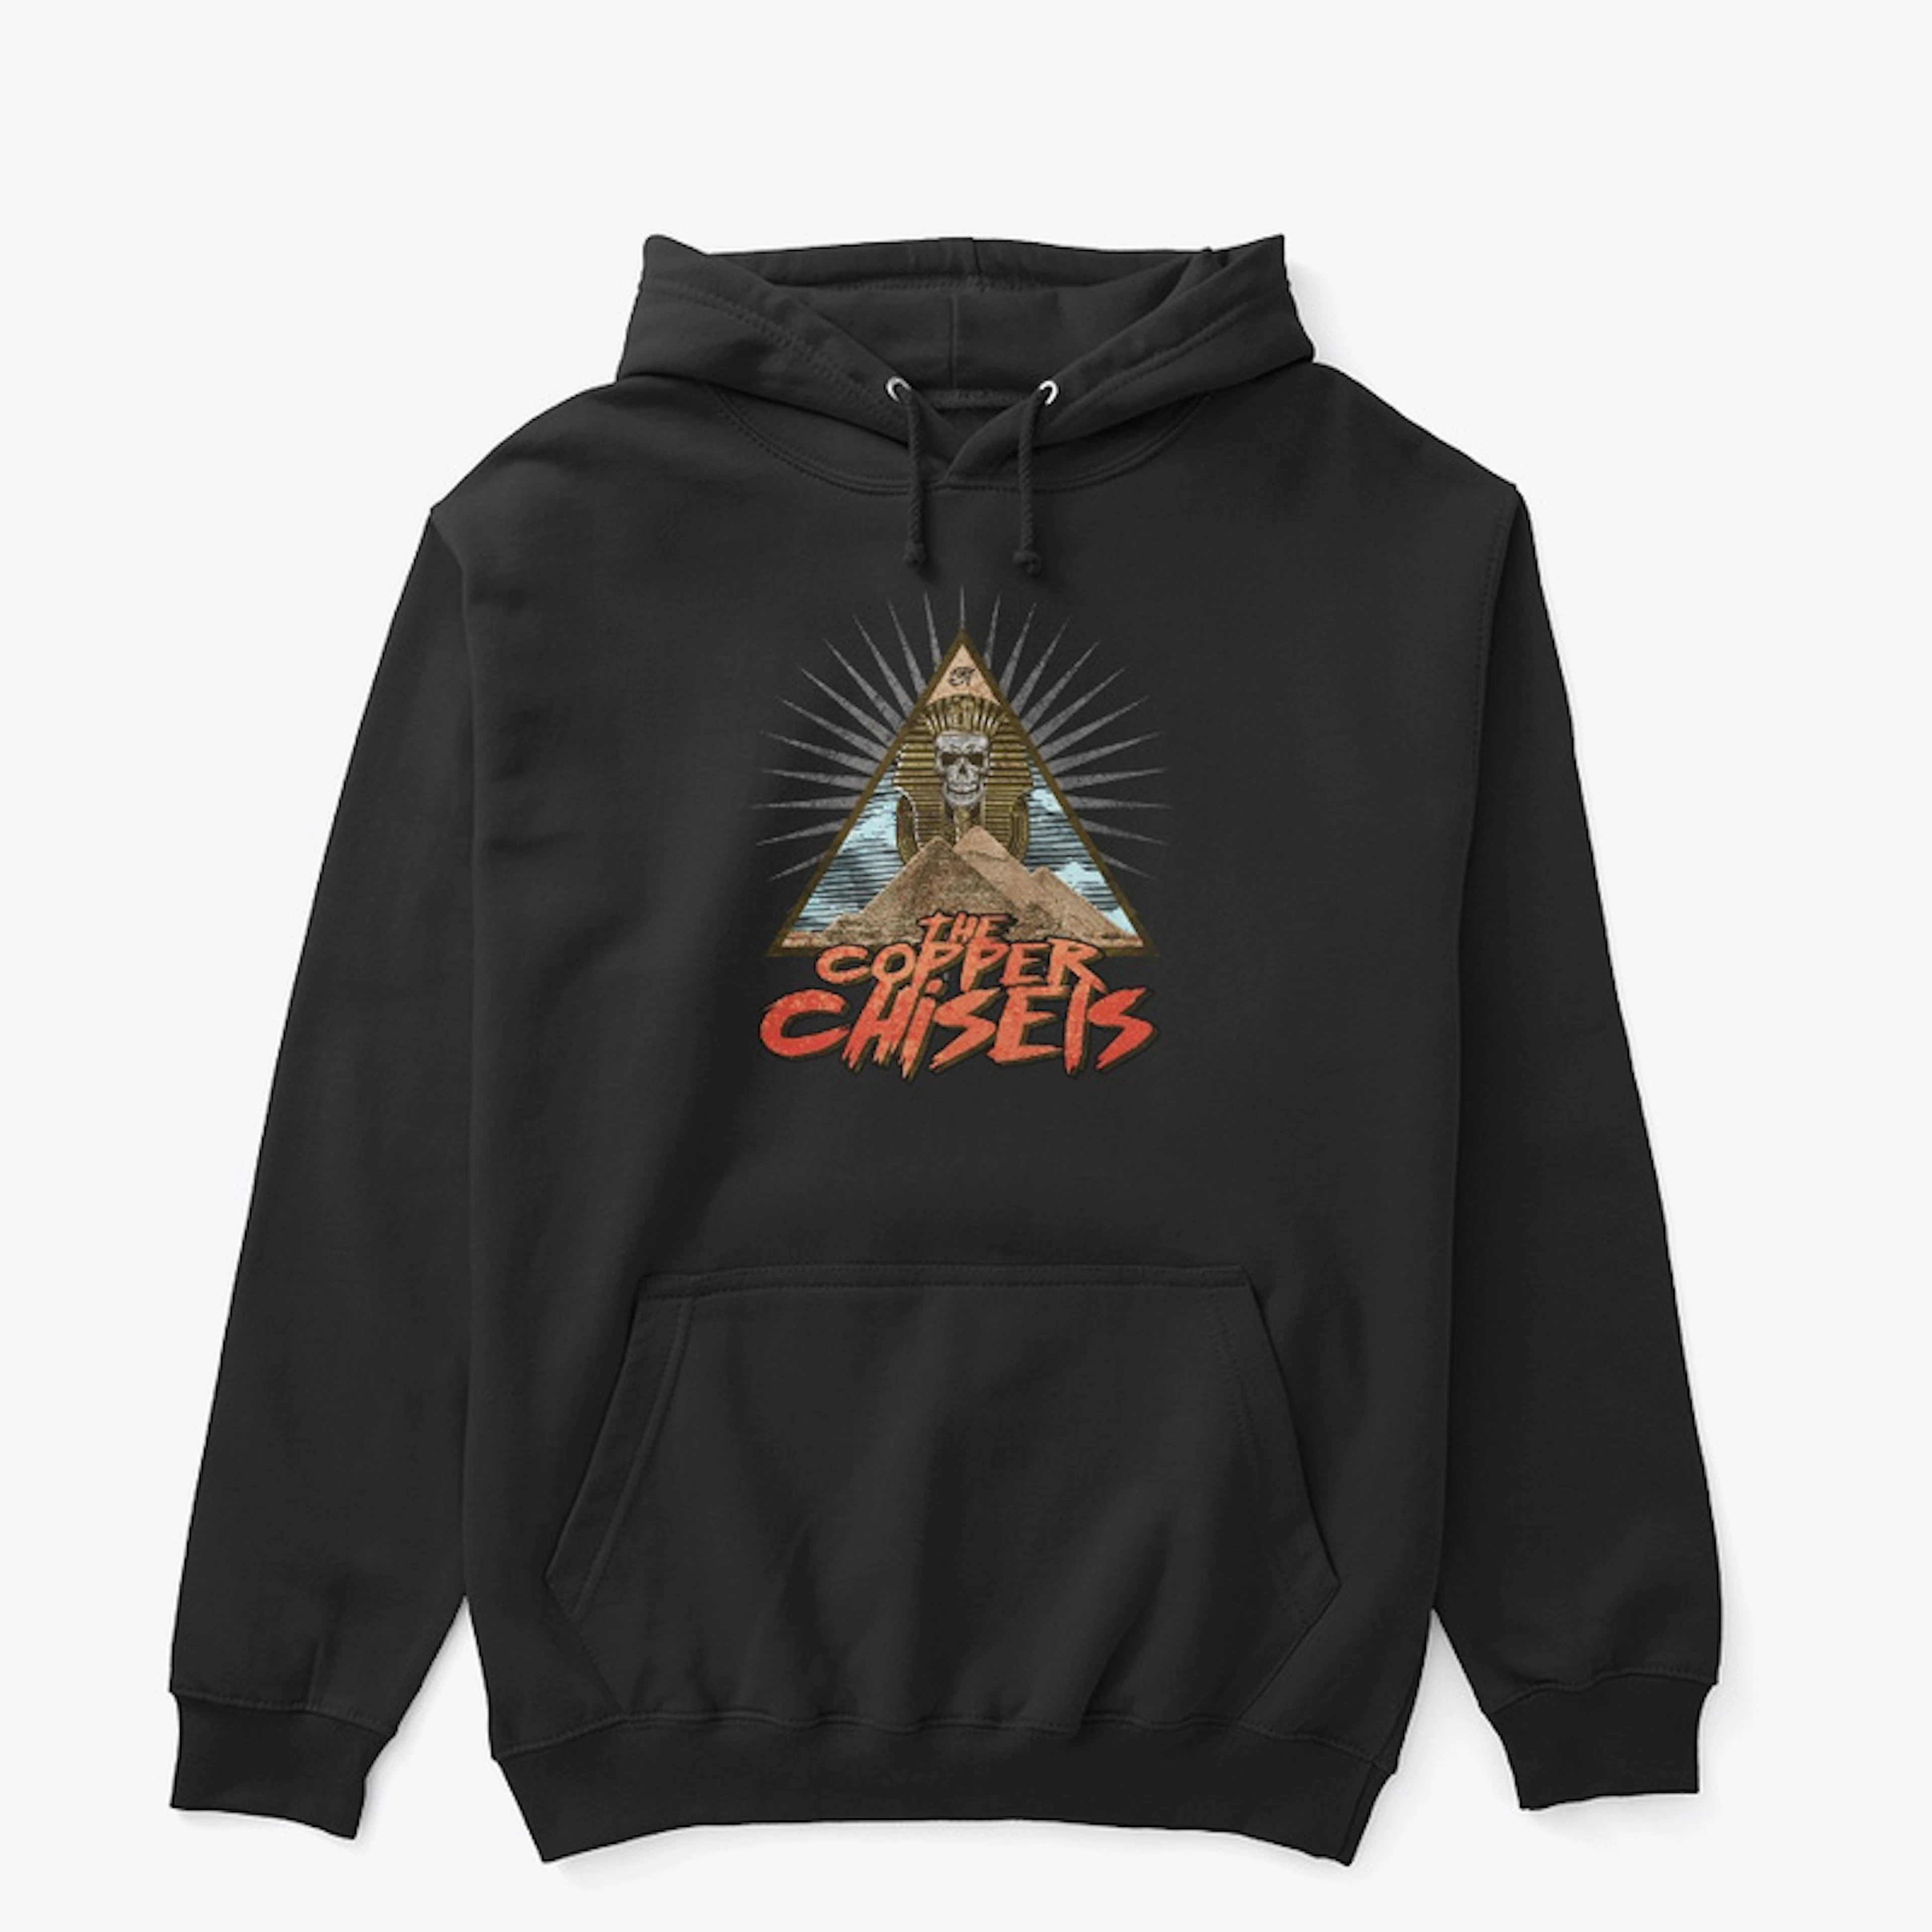 The Copper Chisels Band Merch